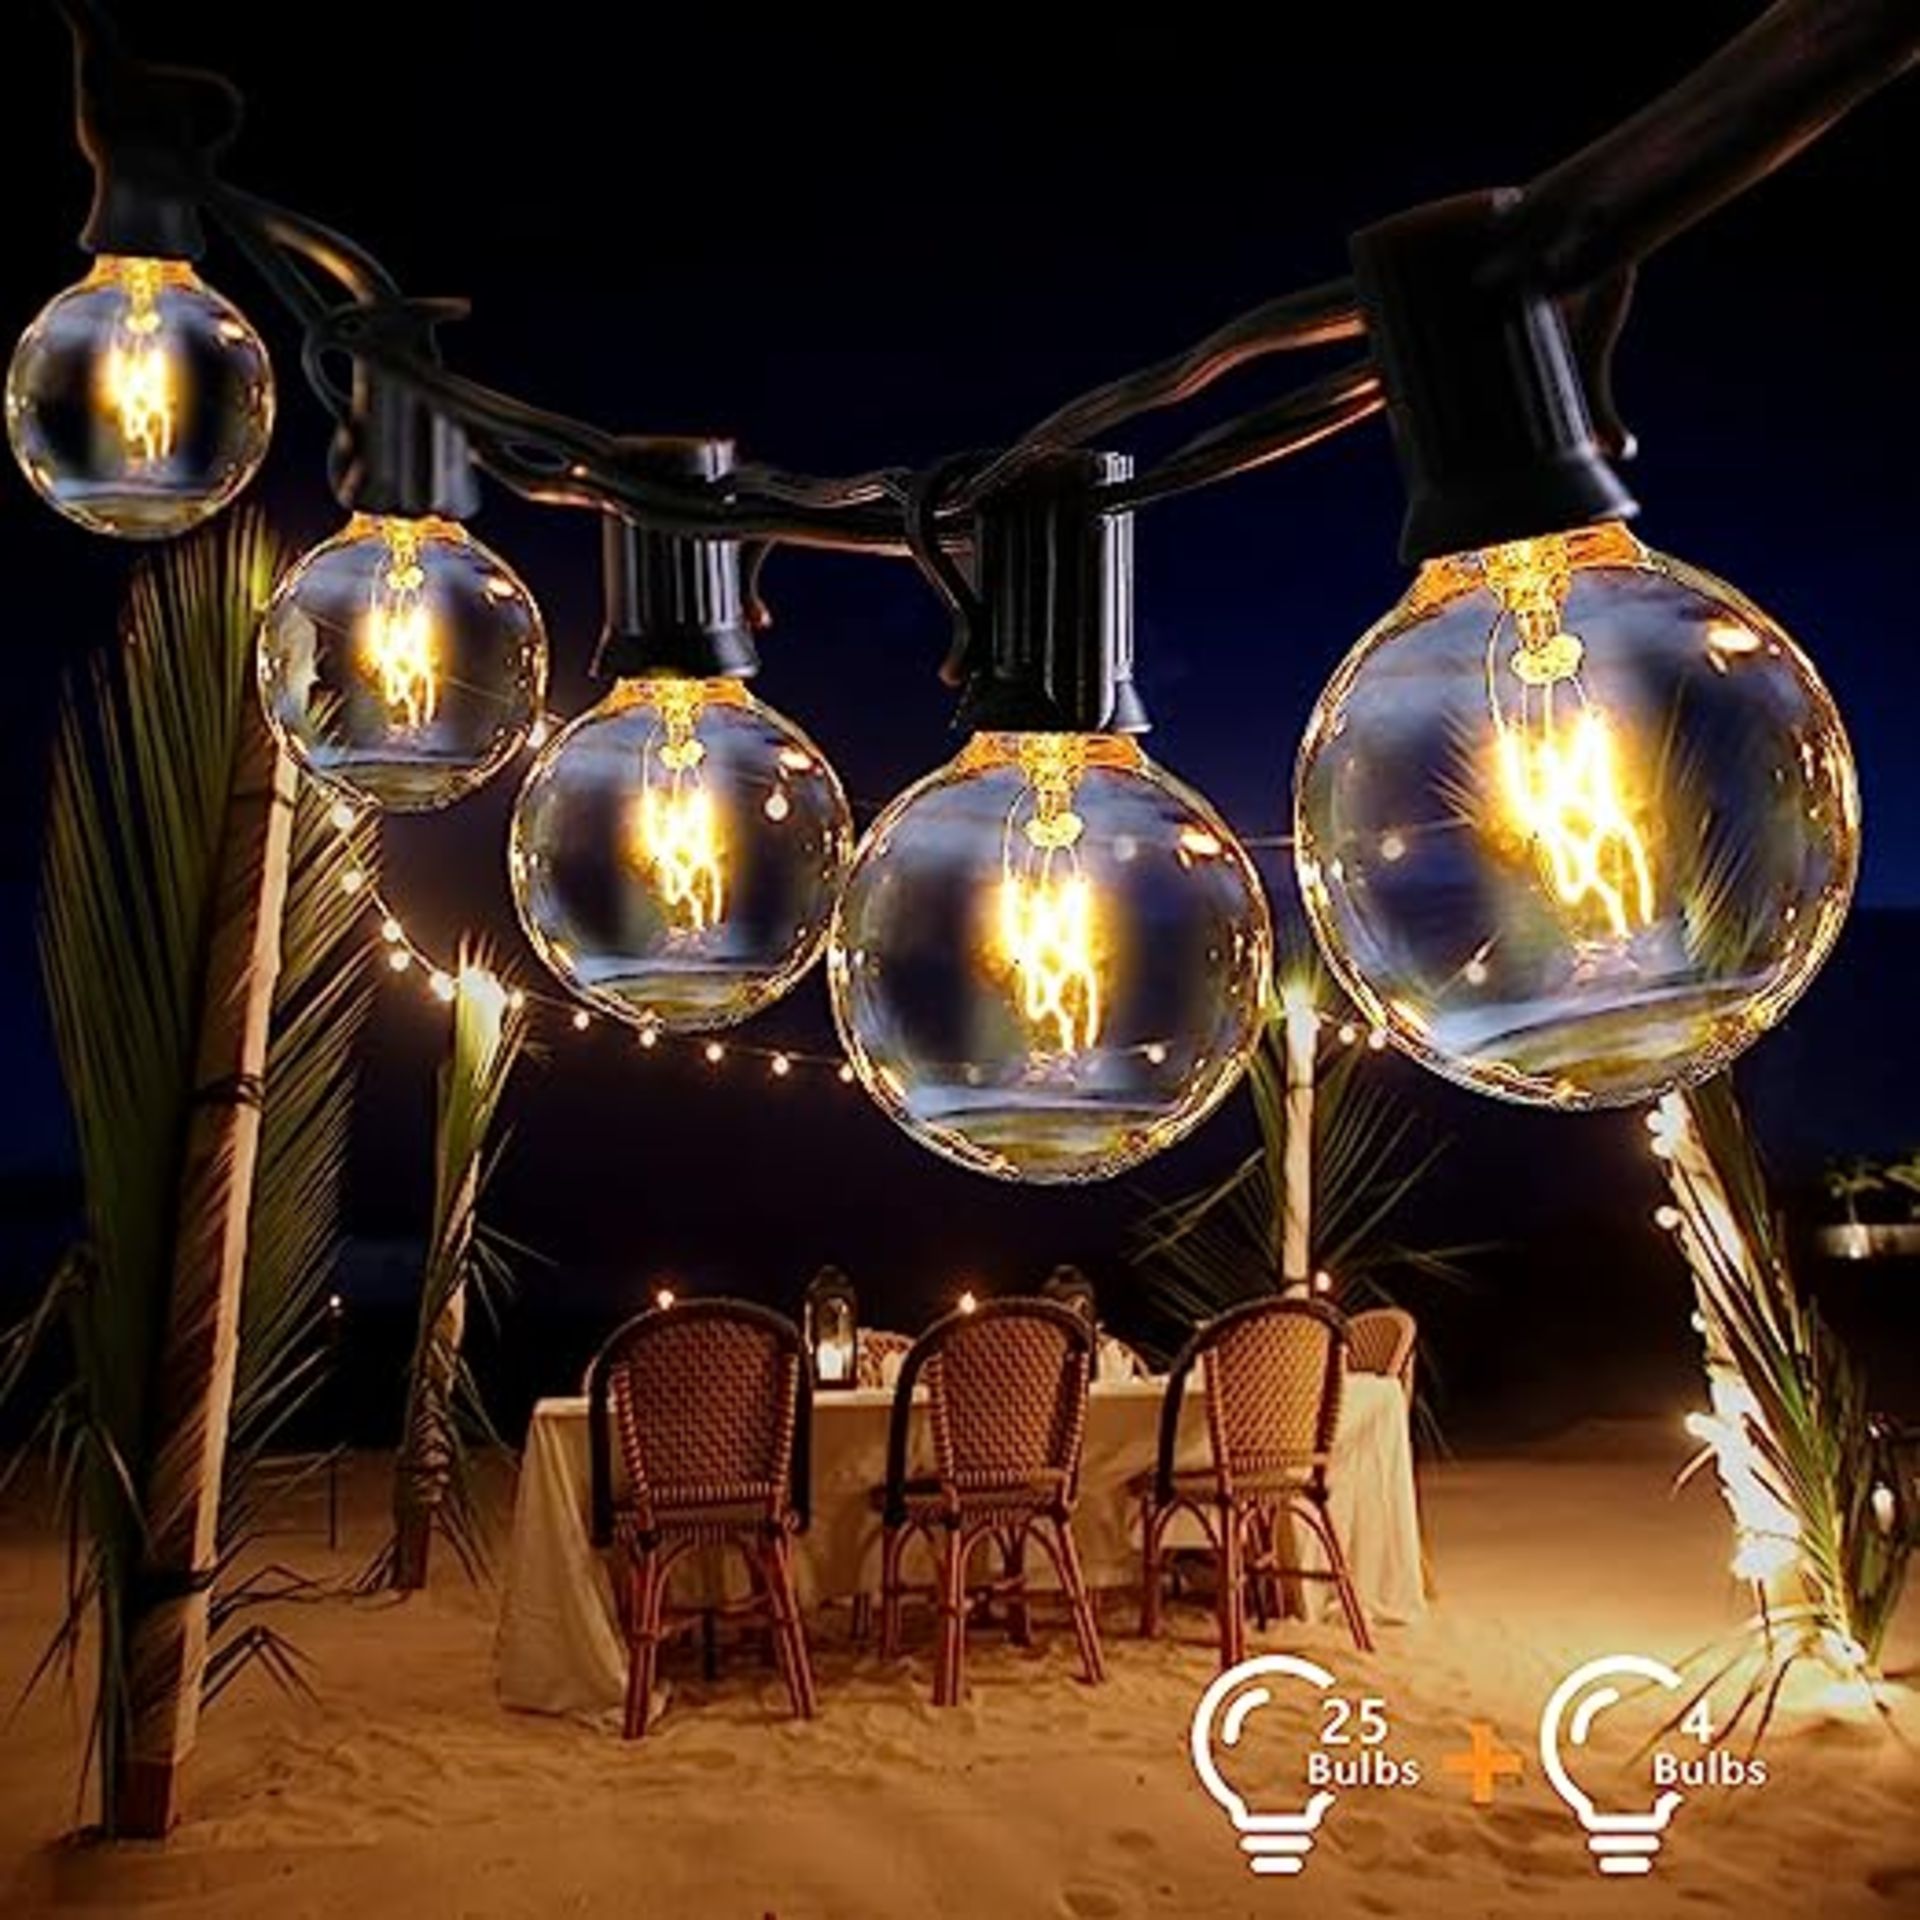 5 x New Boxed Sets of 25 Outdoor Festoon String Lights. 7.5m Long (24.6 foot). G40 Bulbs, IP44 - Image 3 of 3